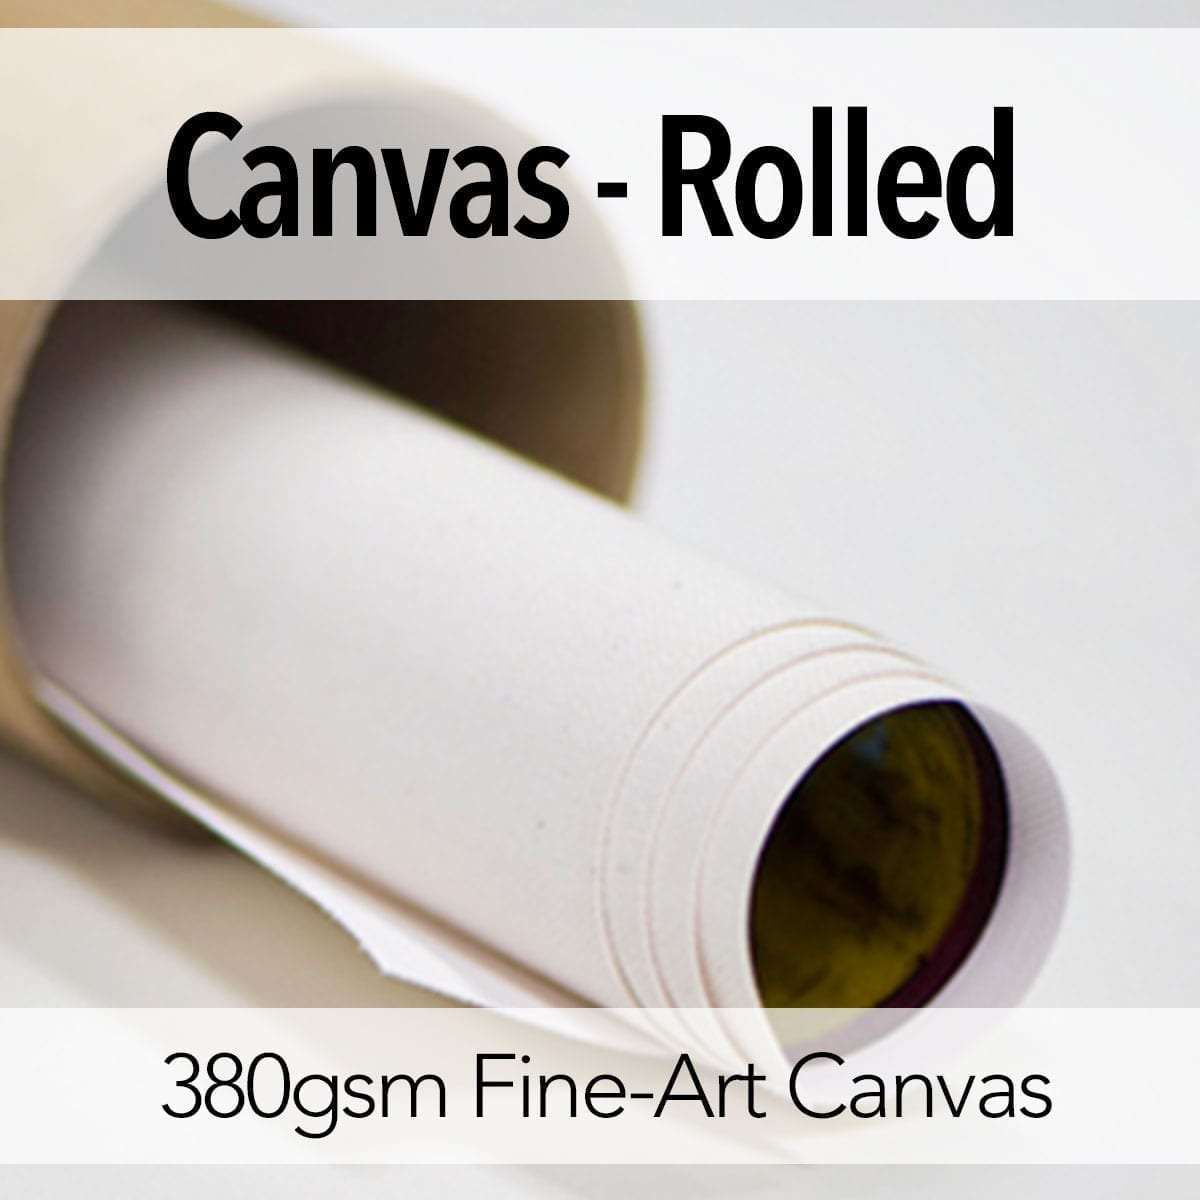 What is a Rolled Canvas Print?